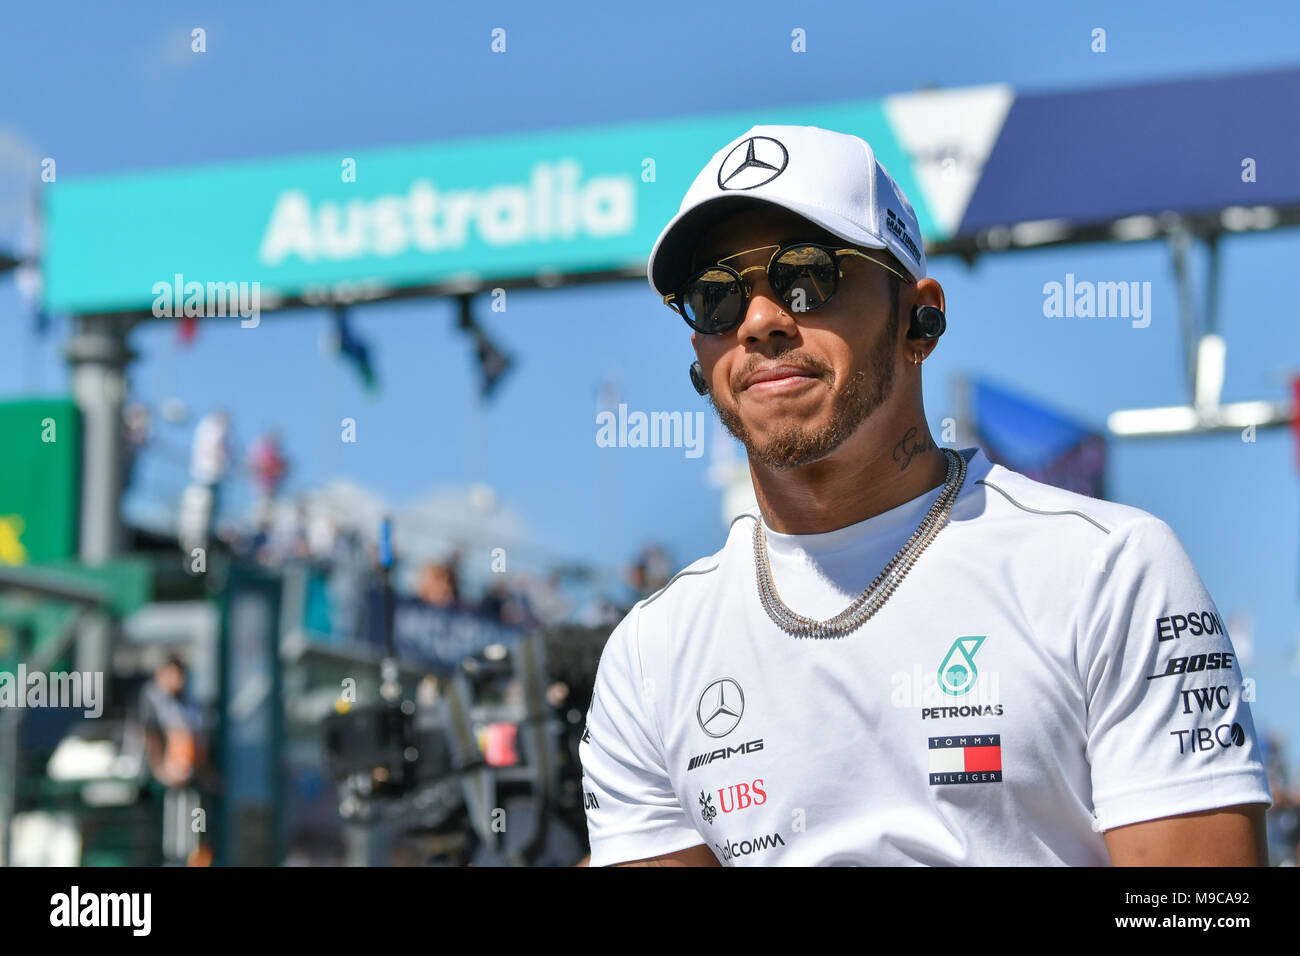 Albert Park, Melbourne, Australia. 25th Mar, 2018. Lewis Hamilton (GBR) #44 from the Mercedes AMG Petronas Motorsport team waves to the crowd during the drivers' parade at the 2018 Australian Formula One Grand Prix at Albert Park, Melbourne, Australia. Sydney Low/Cal Sport Media/Alamy Live News Stock Photo